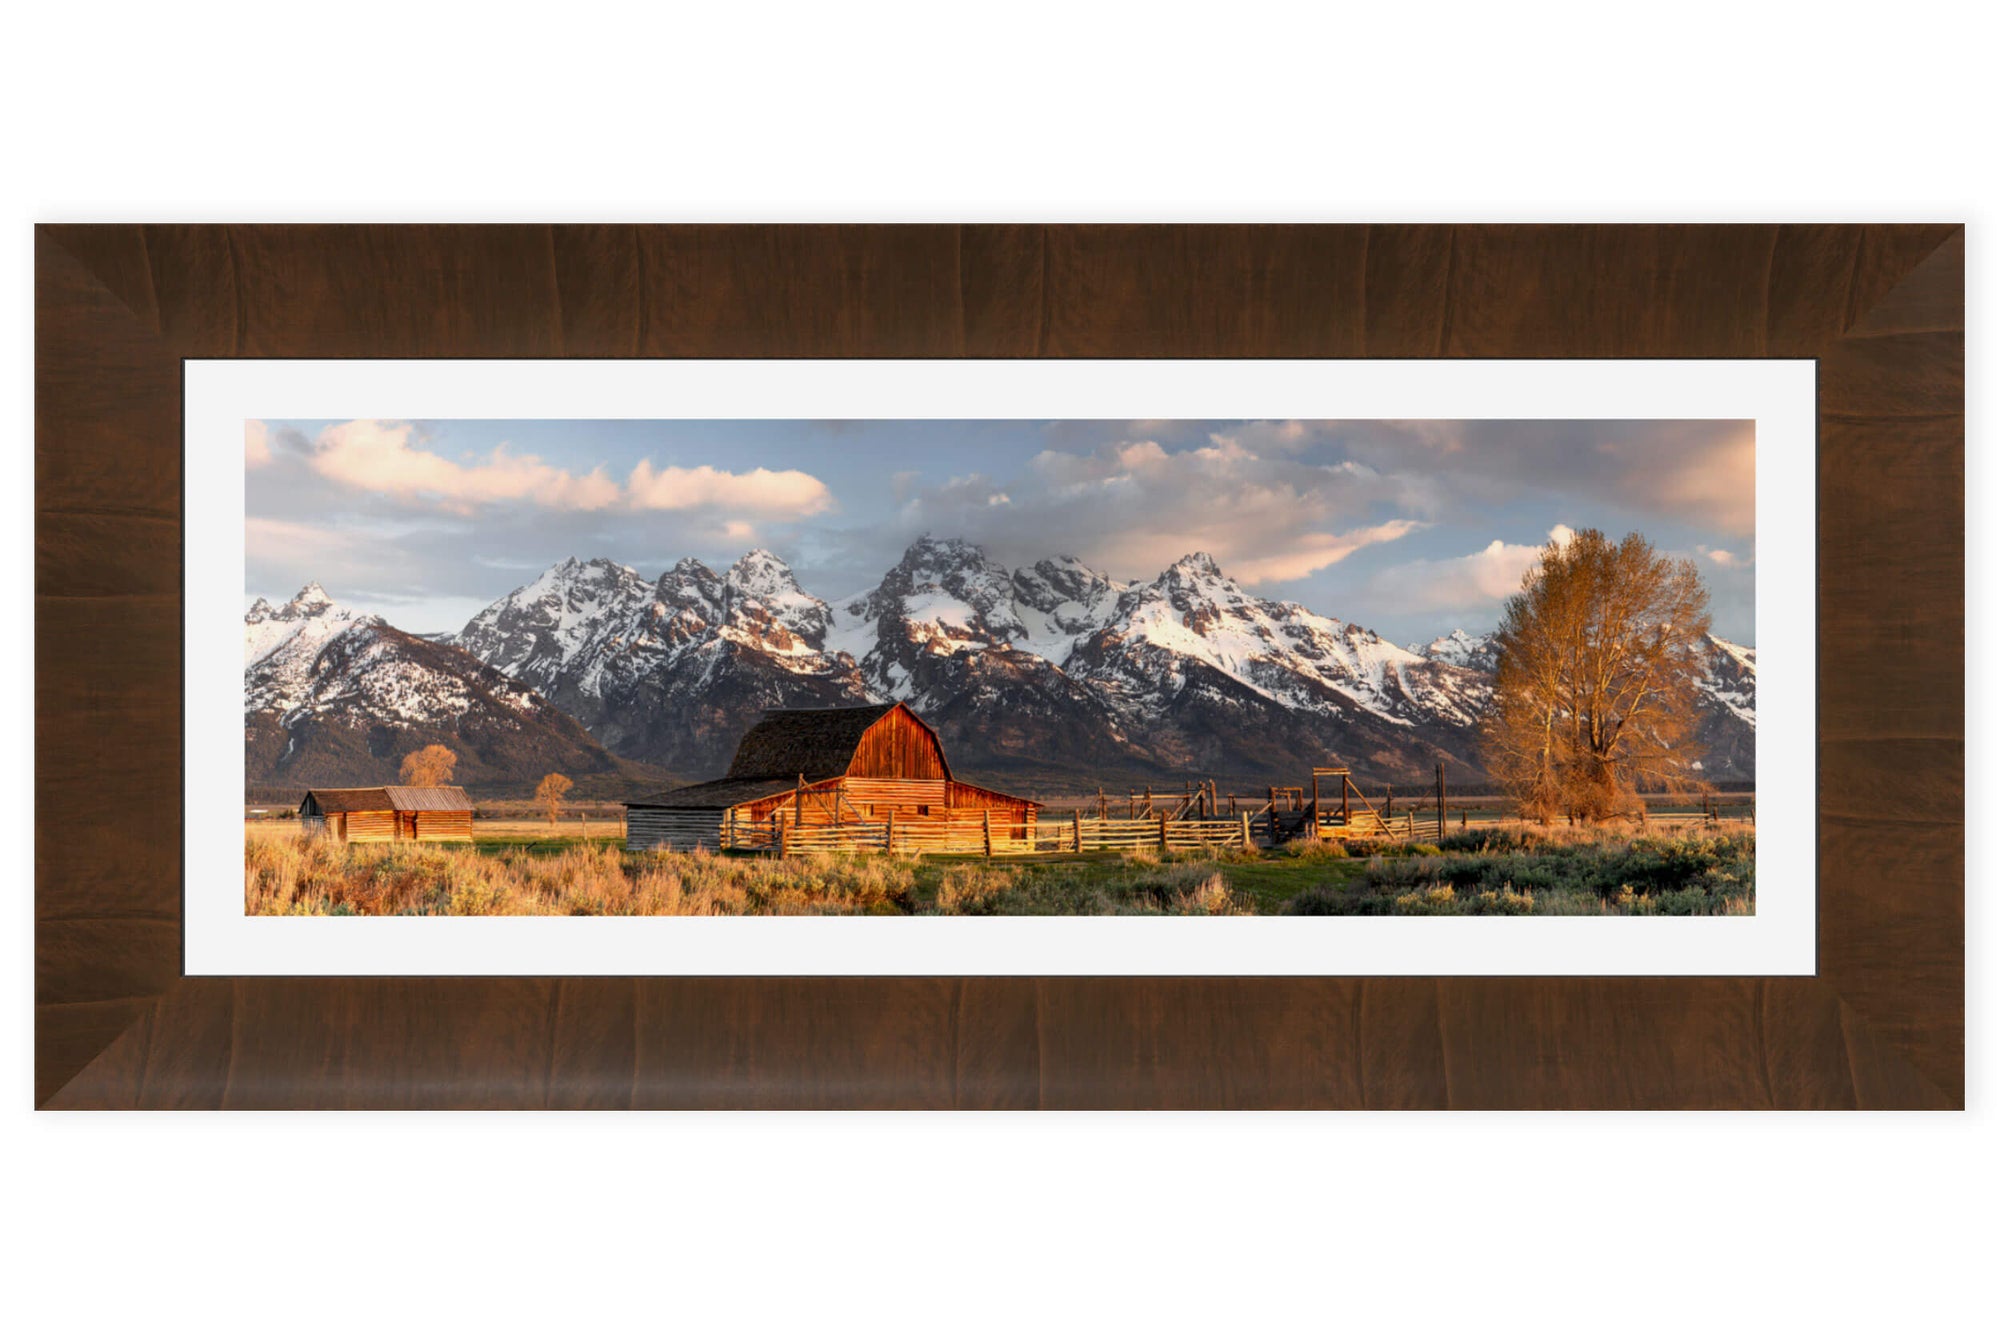 A piece of framed Jackson Hole art shows the barns at Mormon Row in Grand Teton National Park.